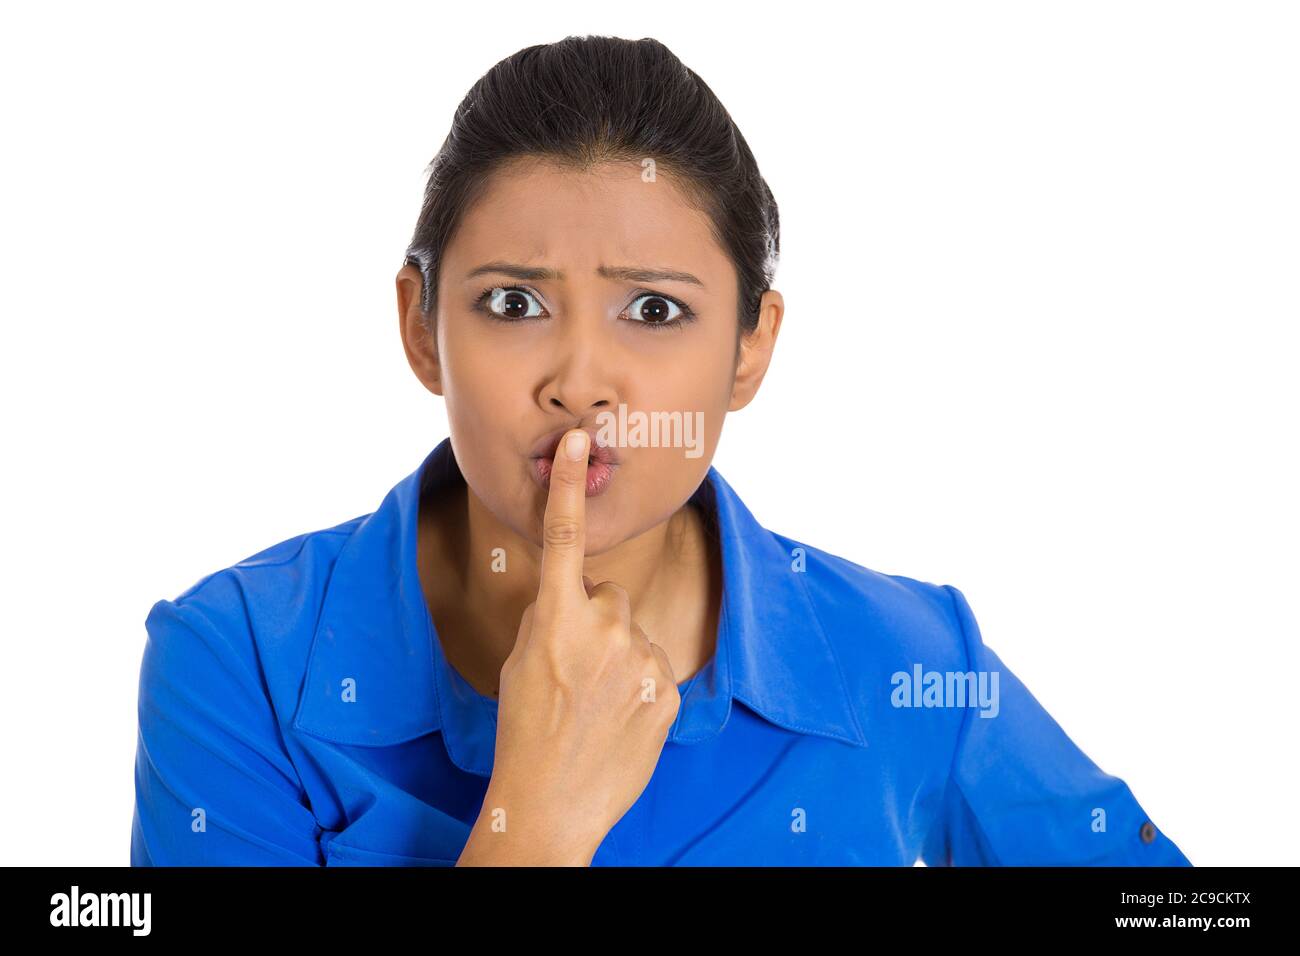 Closeup of a serious woman placing finger on lips, quiet, silence gesture isolated on white background. Human face expressions, signs, body language Stock Photo